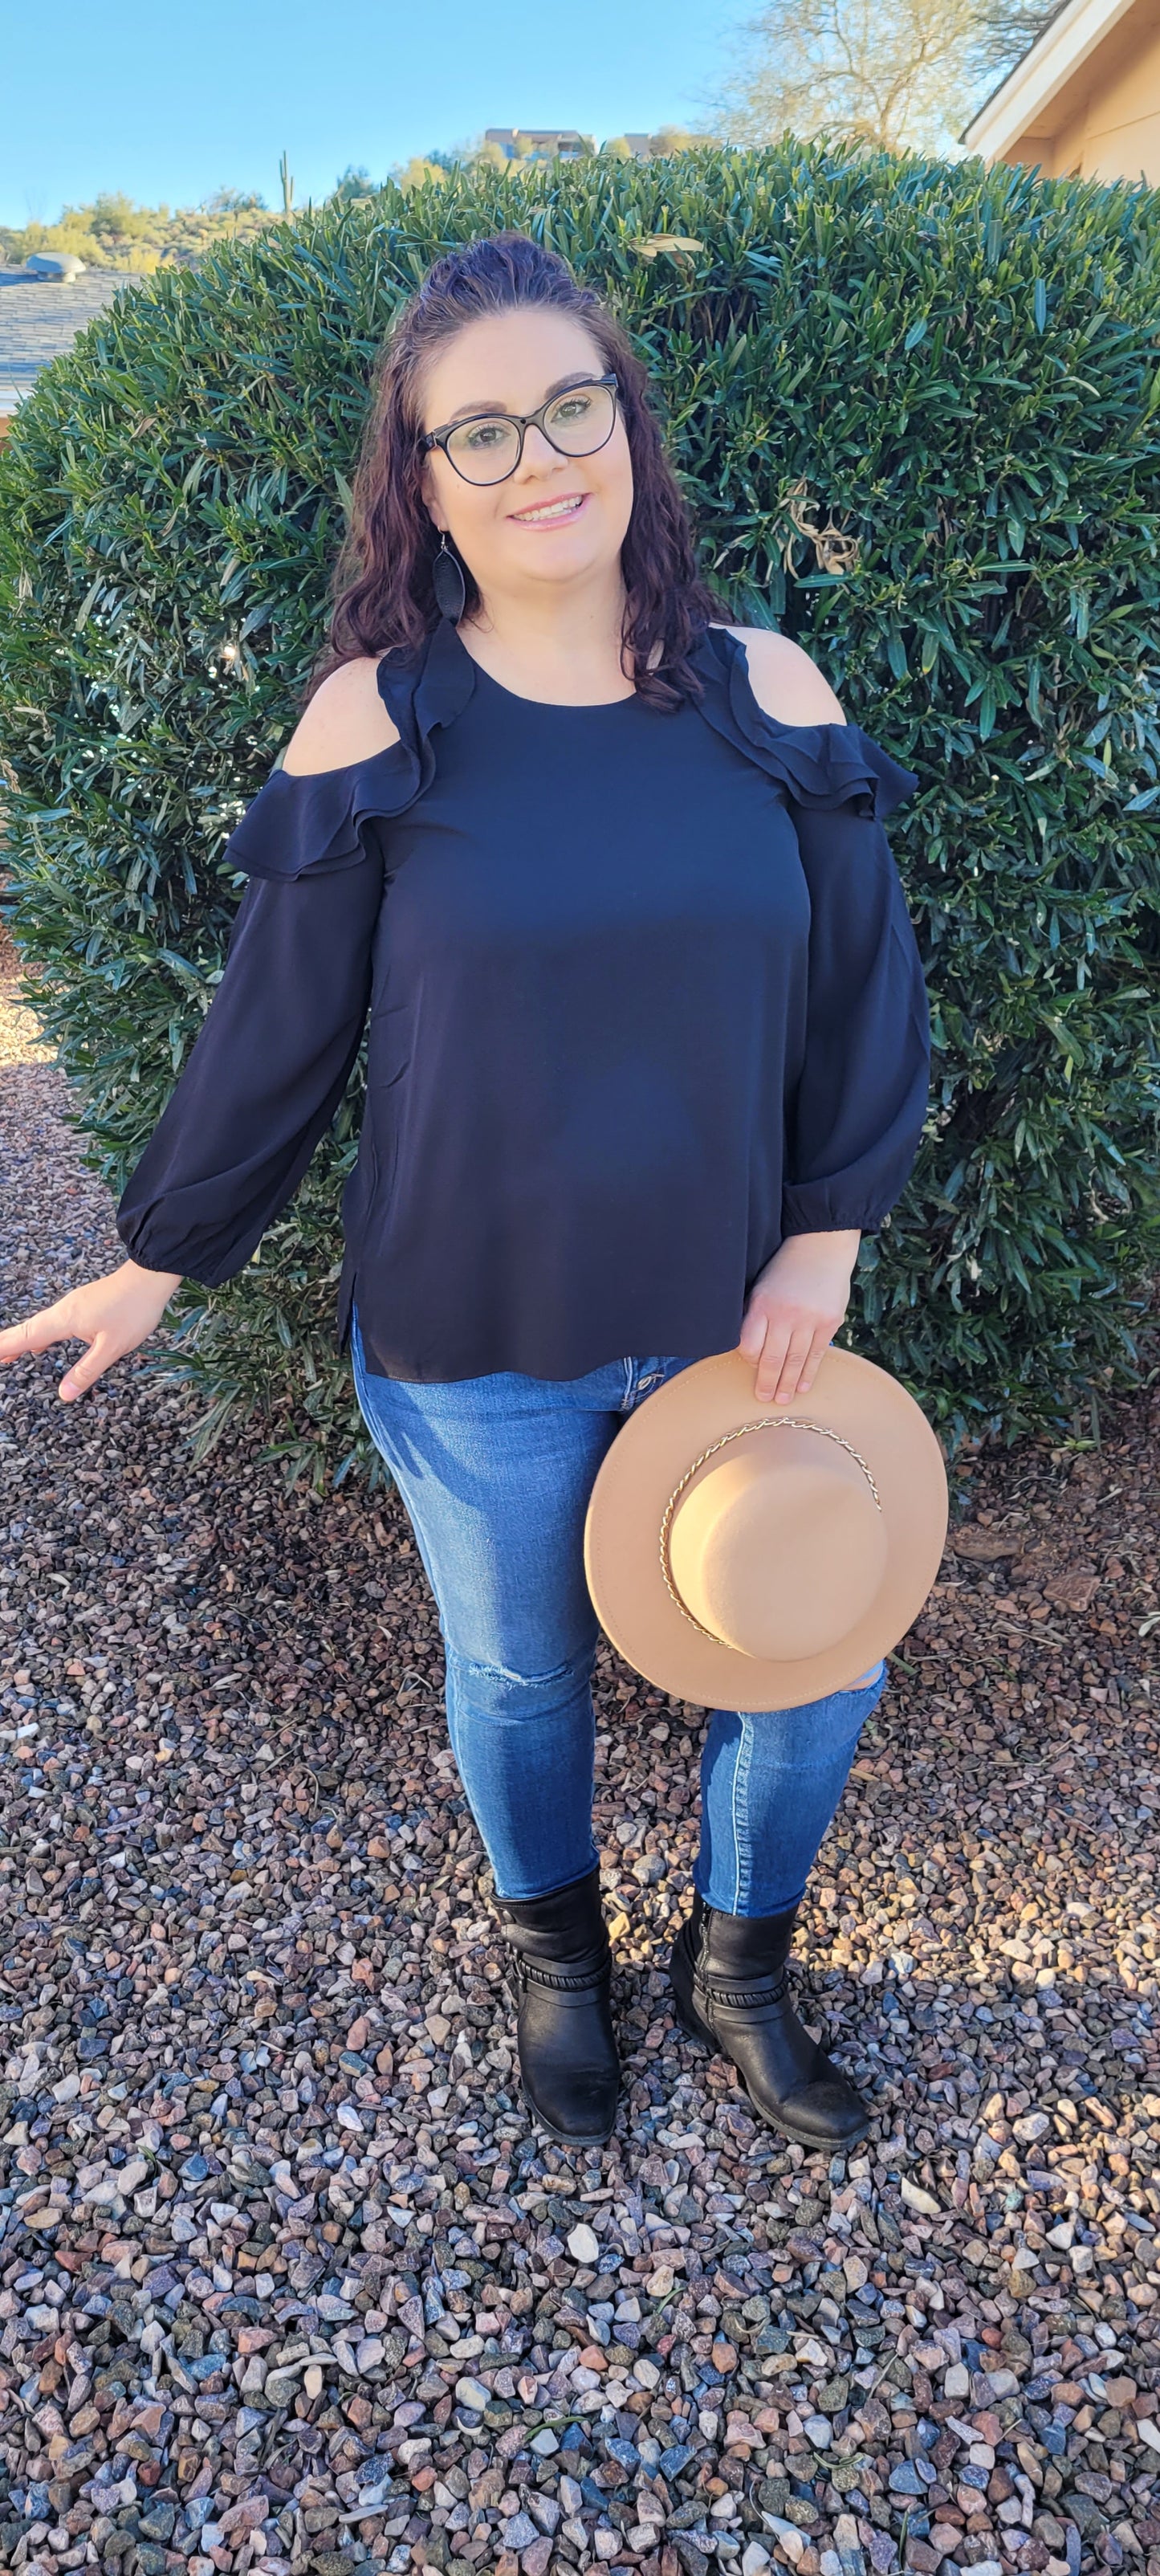 The Twilight top is a must have staple in your closet. This black top features puff sleeves, with an elastic cuff, open ruffled cold shoulder long sleeves, and rounded neckline. This top is light weight, so it can be worn in the summer, spring, fall or winter. You can dress this number up, or leave it the way it is, since it's just so darn cute.  Sizes small through large.